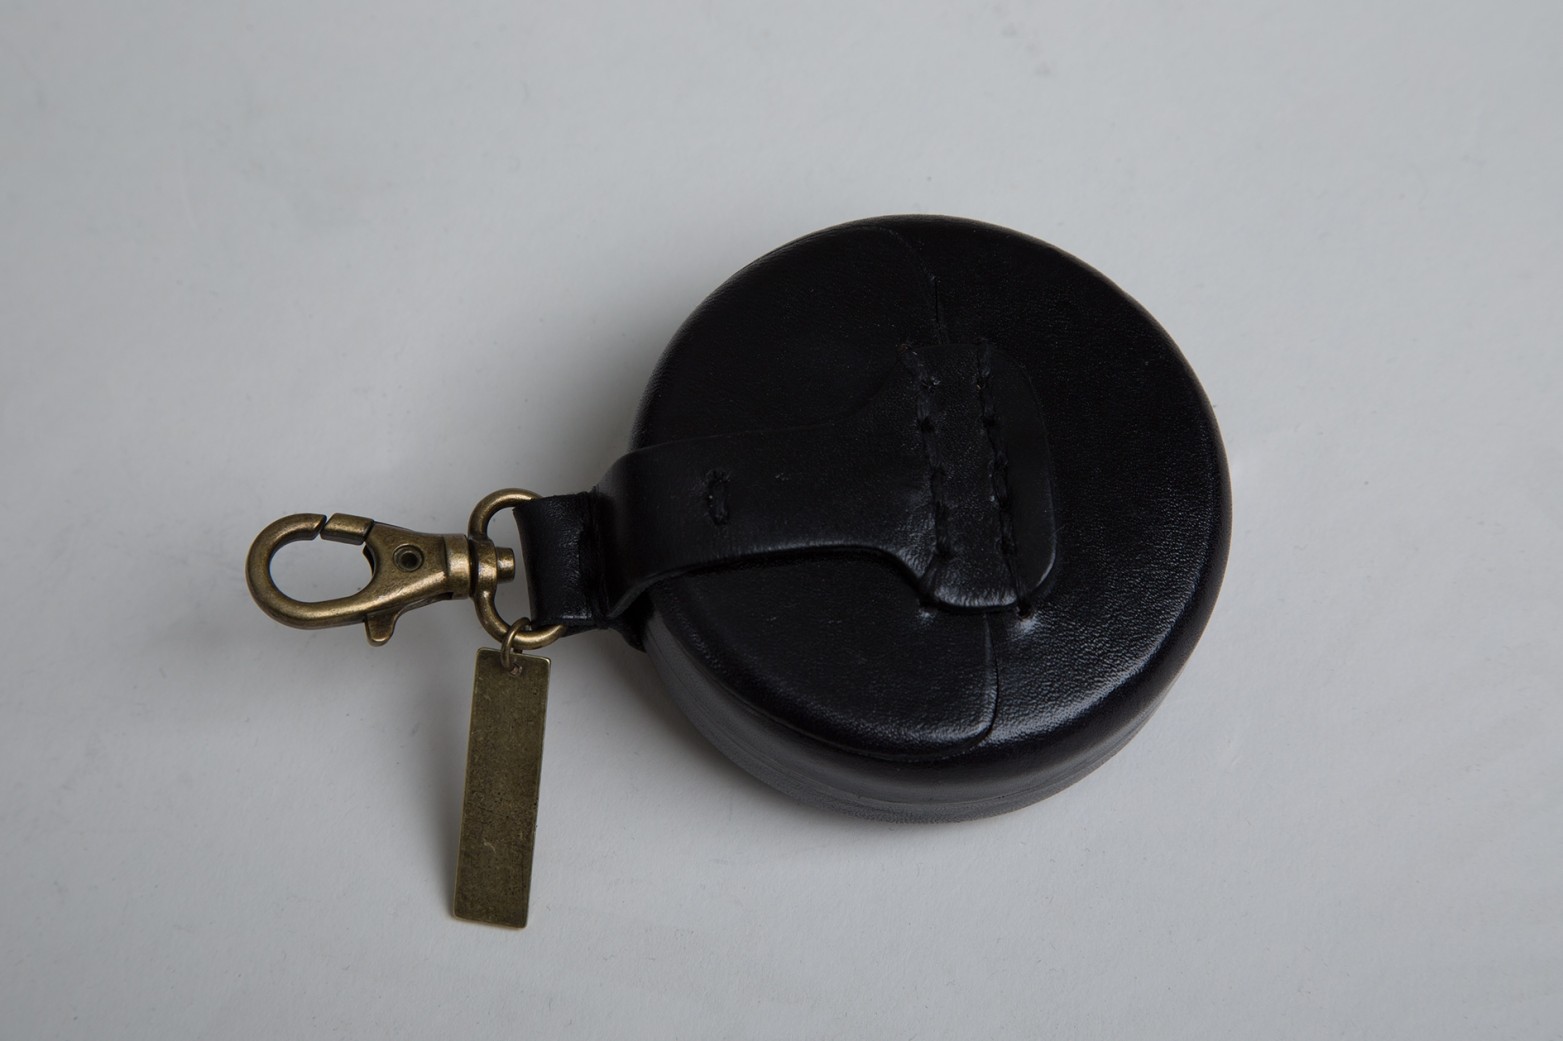 The New World Order Grenade Coin Purse